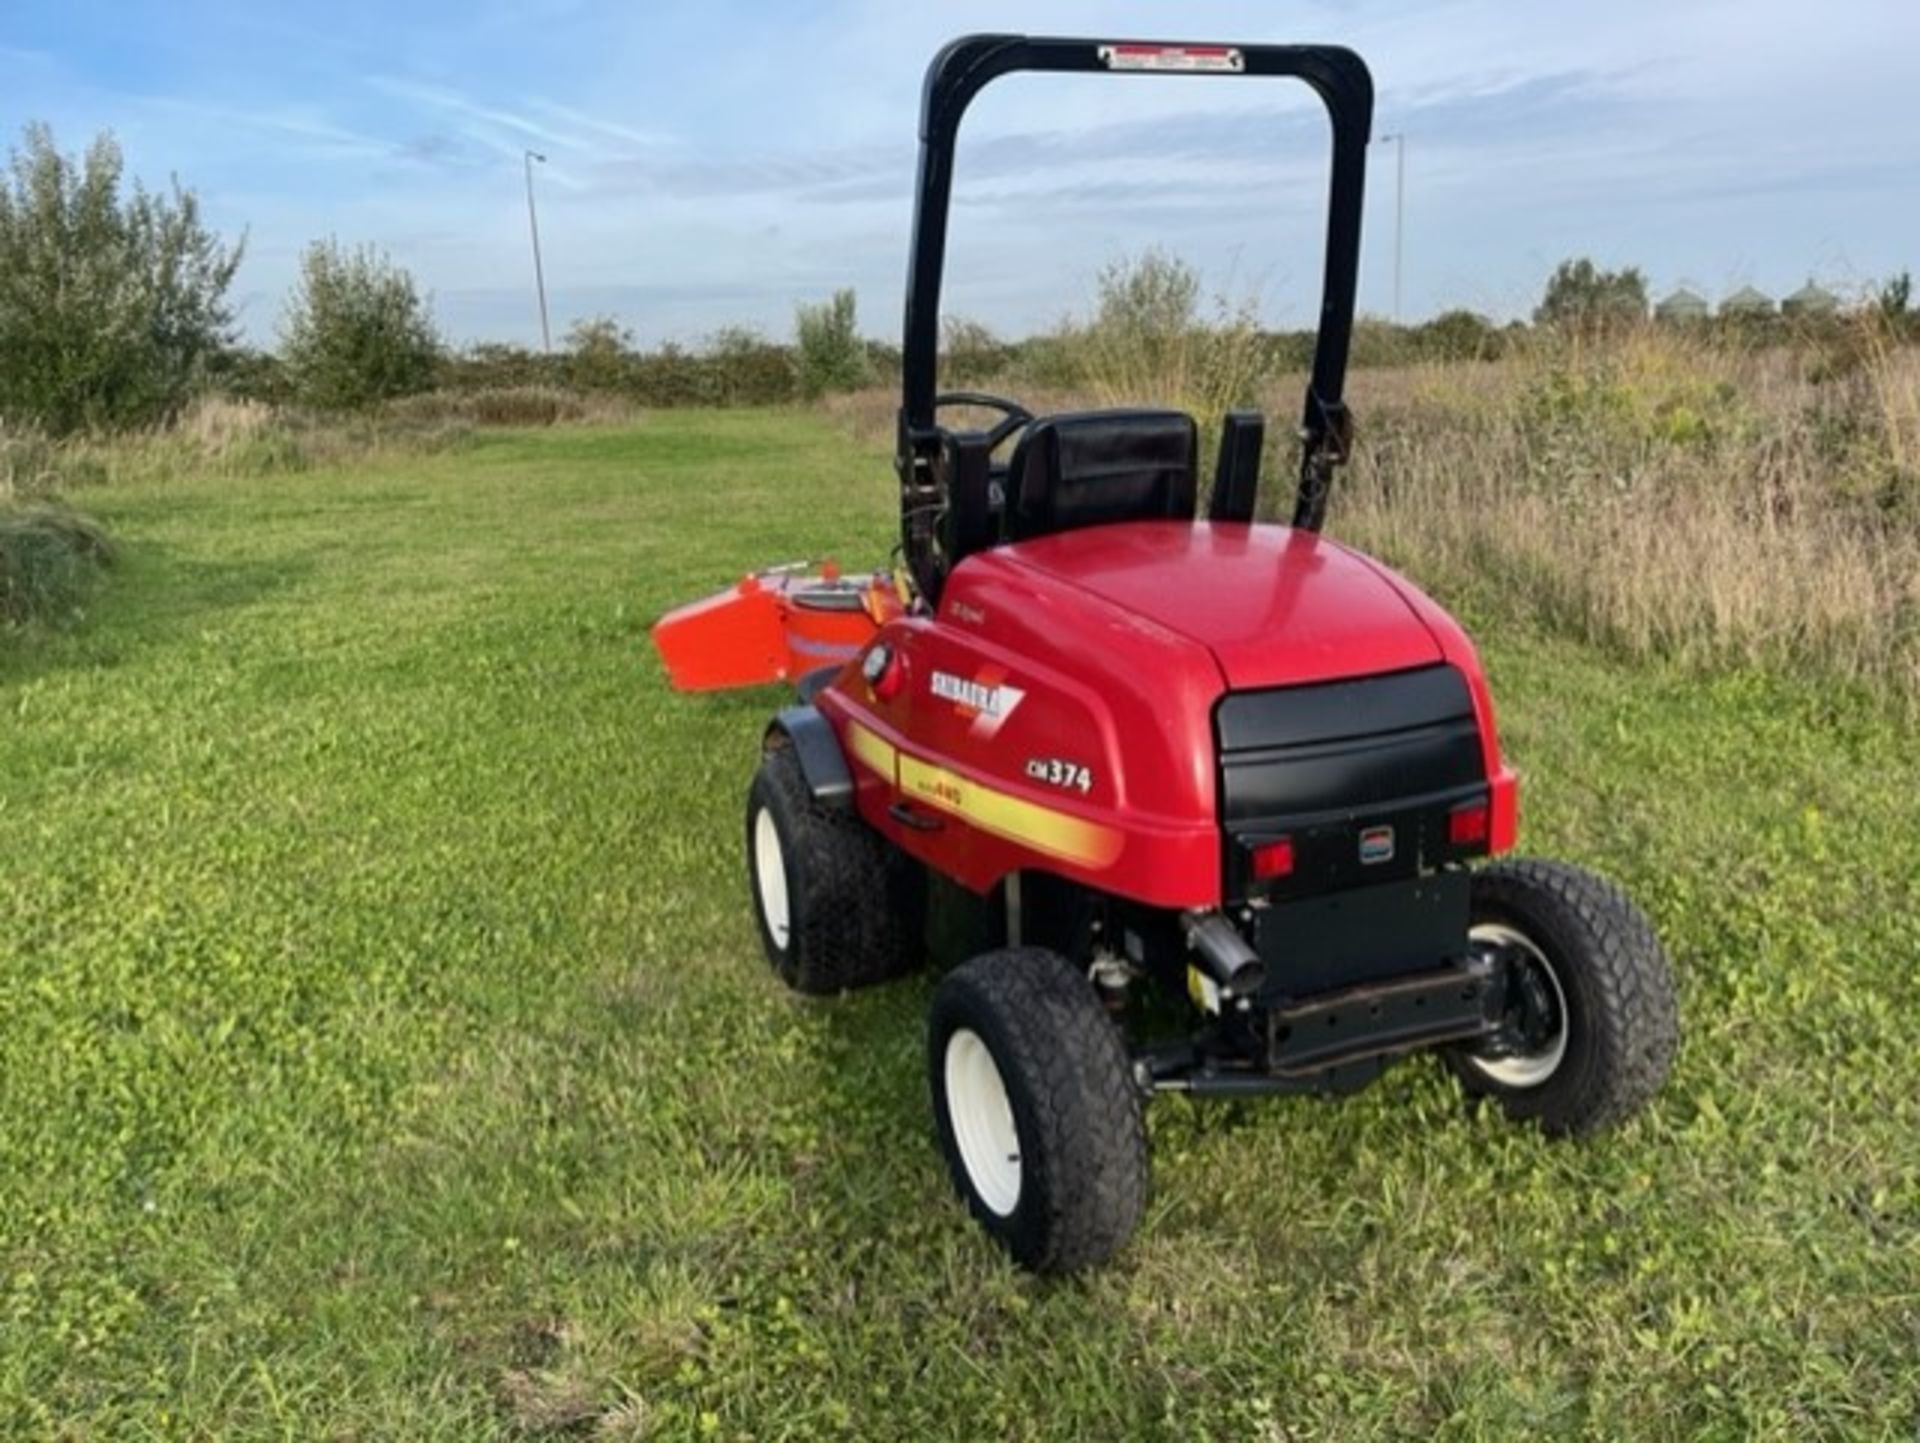 2018, SHIBAURA CM374 OUTFRONT MOWER WITH DECK & BLOWER - Image 2 of 13